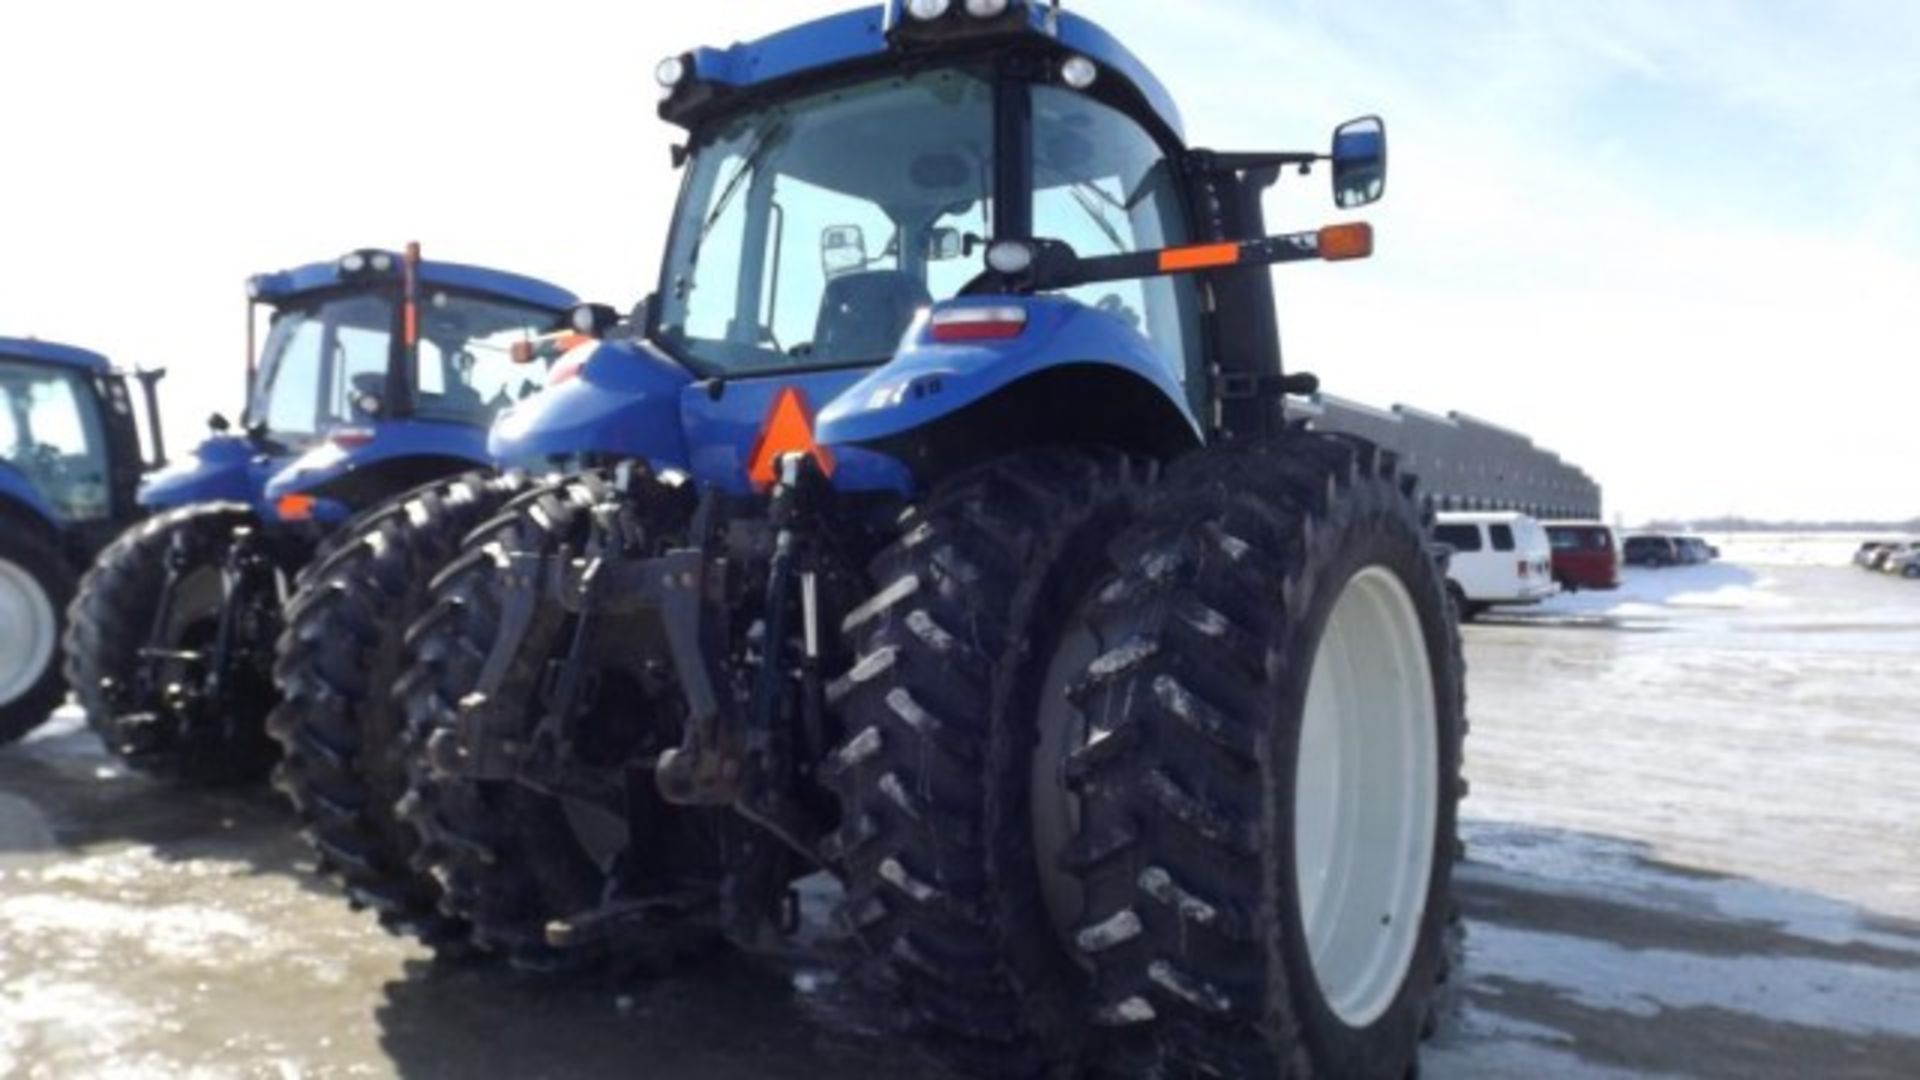 New Holland T8.275 Tractor '12, sn#ZCRC03823 2101 Hrs, MFWD, Deluxe Cab, Buddy Seat, 235 HP, 18/4 - Image 4 of 18